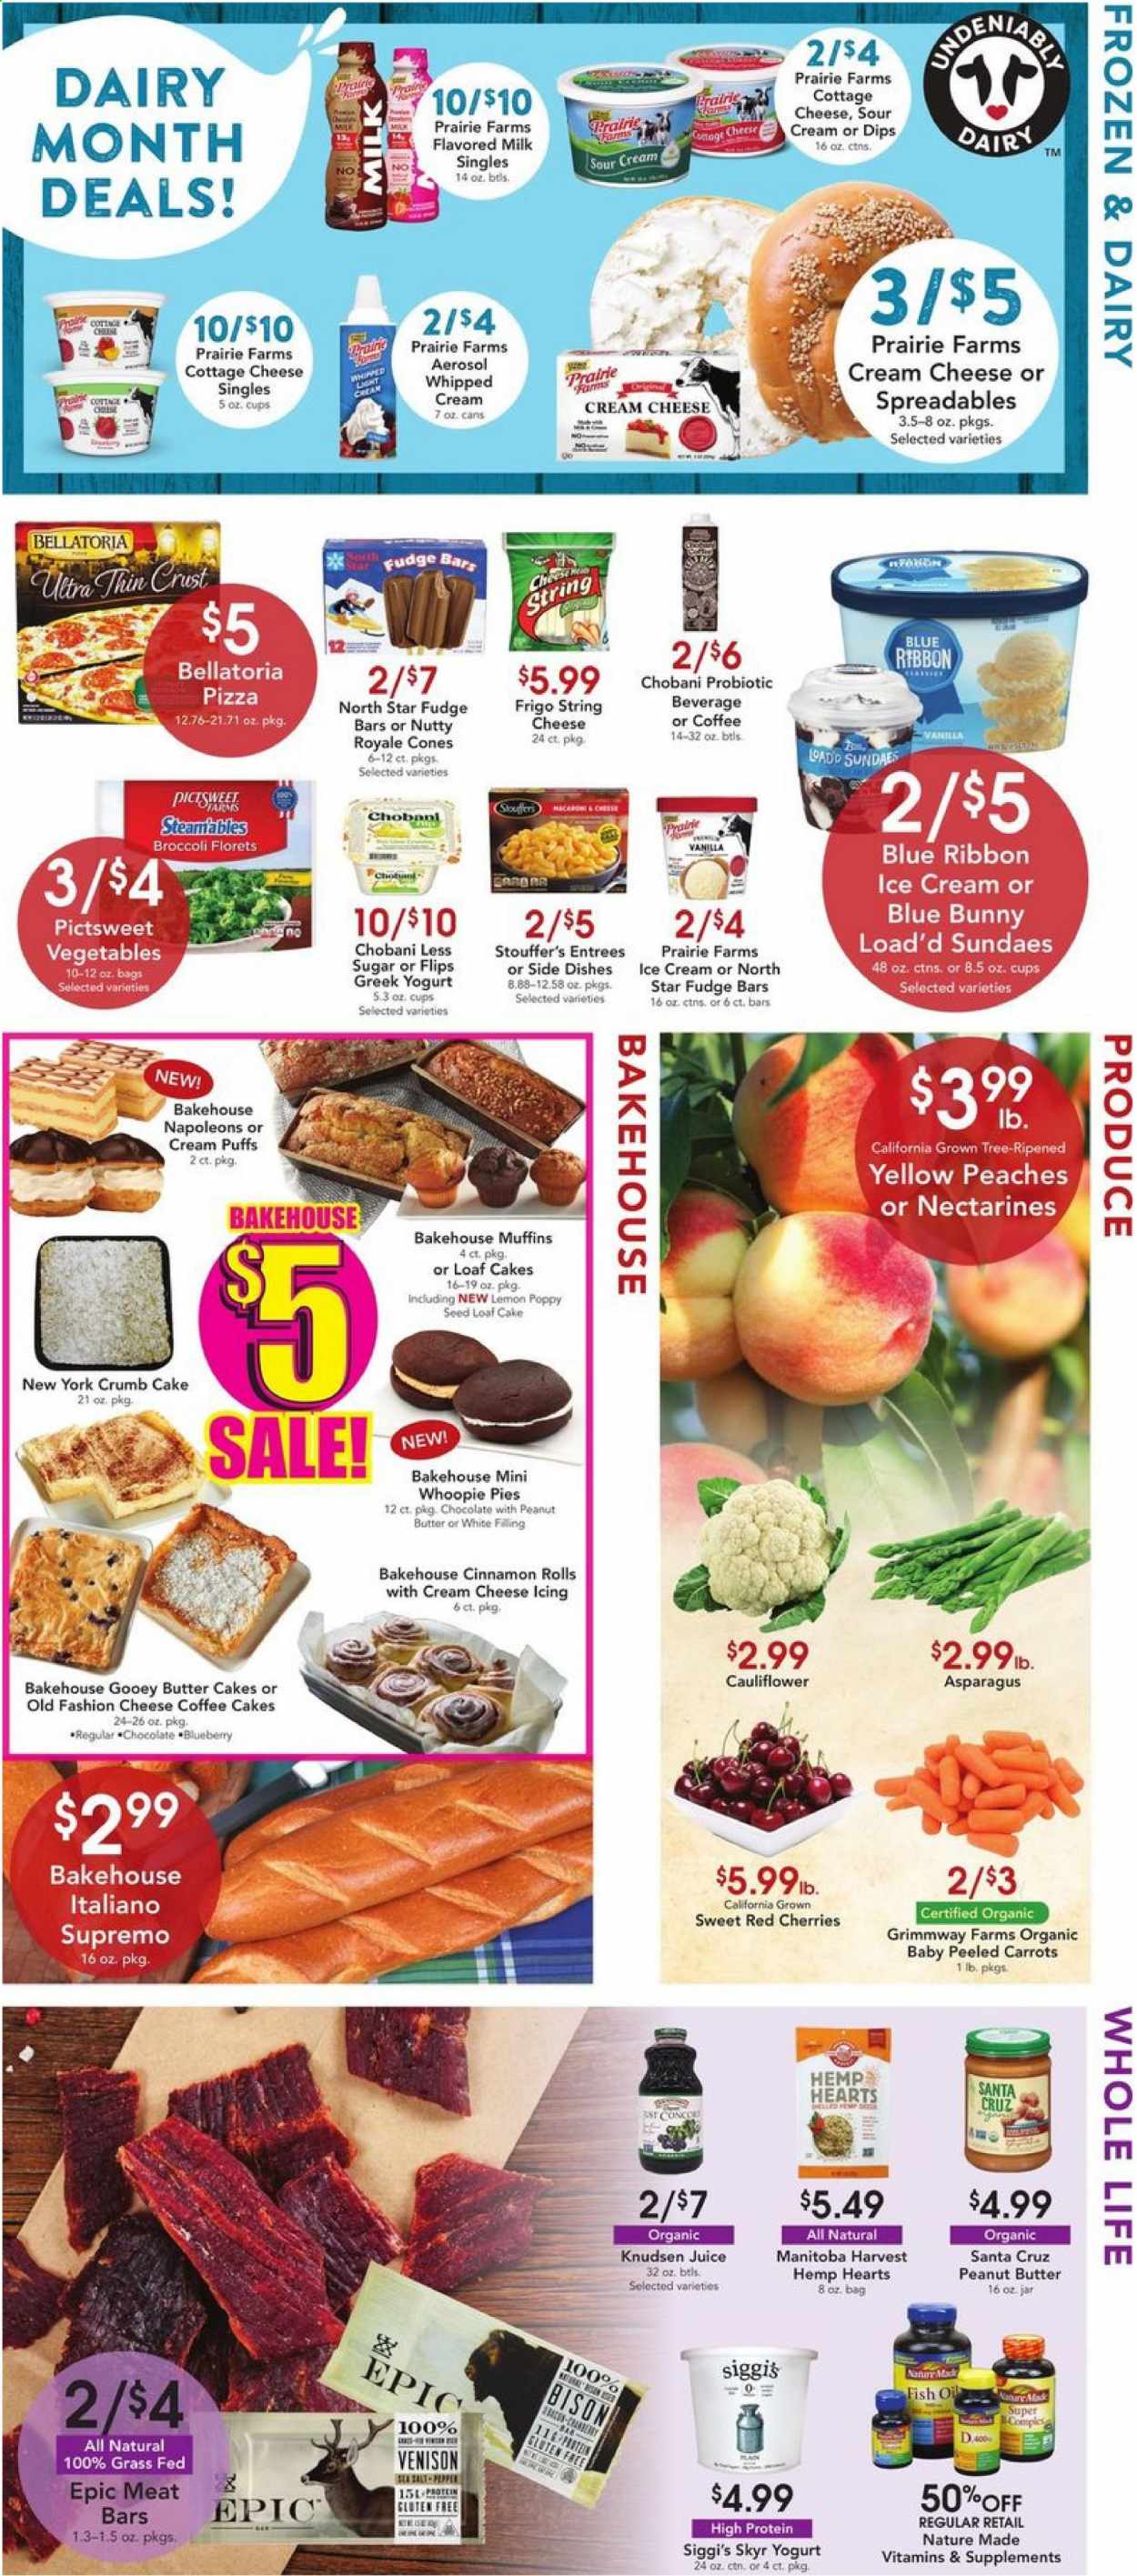 thumbnail - Dierbergs Flyer - 06/01/2021 - 06/07/2021 - Sales products - venison meat, cake, cinnamon roll, puffs, muffin, loaf cake, cream puffs, asparagus, broccoli, carrots, cauliflower, cherries, fish, pizza, cottage cheese, string cheese, greek yoghurt, yoghurt, Chobani, milk, flavoured milk, sour cream, whipped cream, ice cream, Blue Ribbon, Blue Bunny, Stouffer's, Bellatoria, fudge, pepper, peanut butter, juice, plant seeds, Nature Made, nectarines, peaches. Page 3.